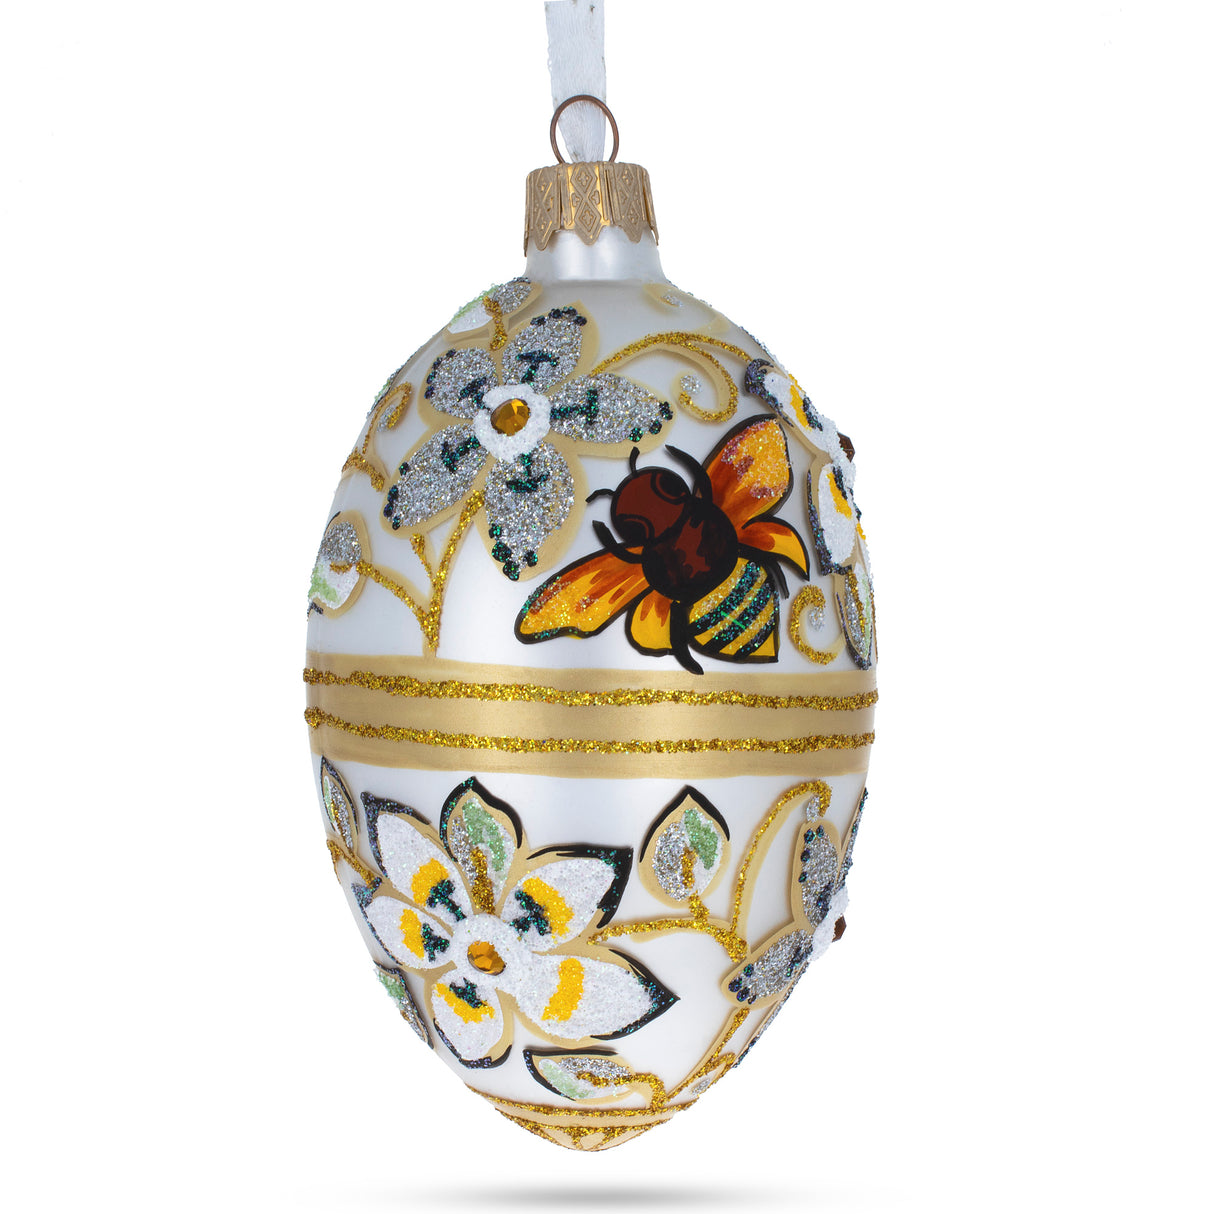 Bee On Flowers Glass Egg Ornament 4 Inches in White color, Oval shape